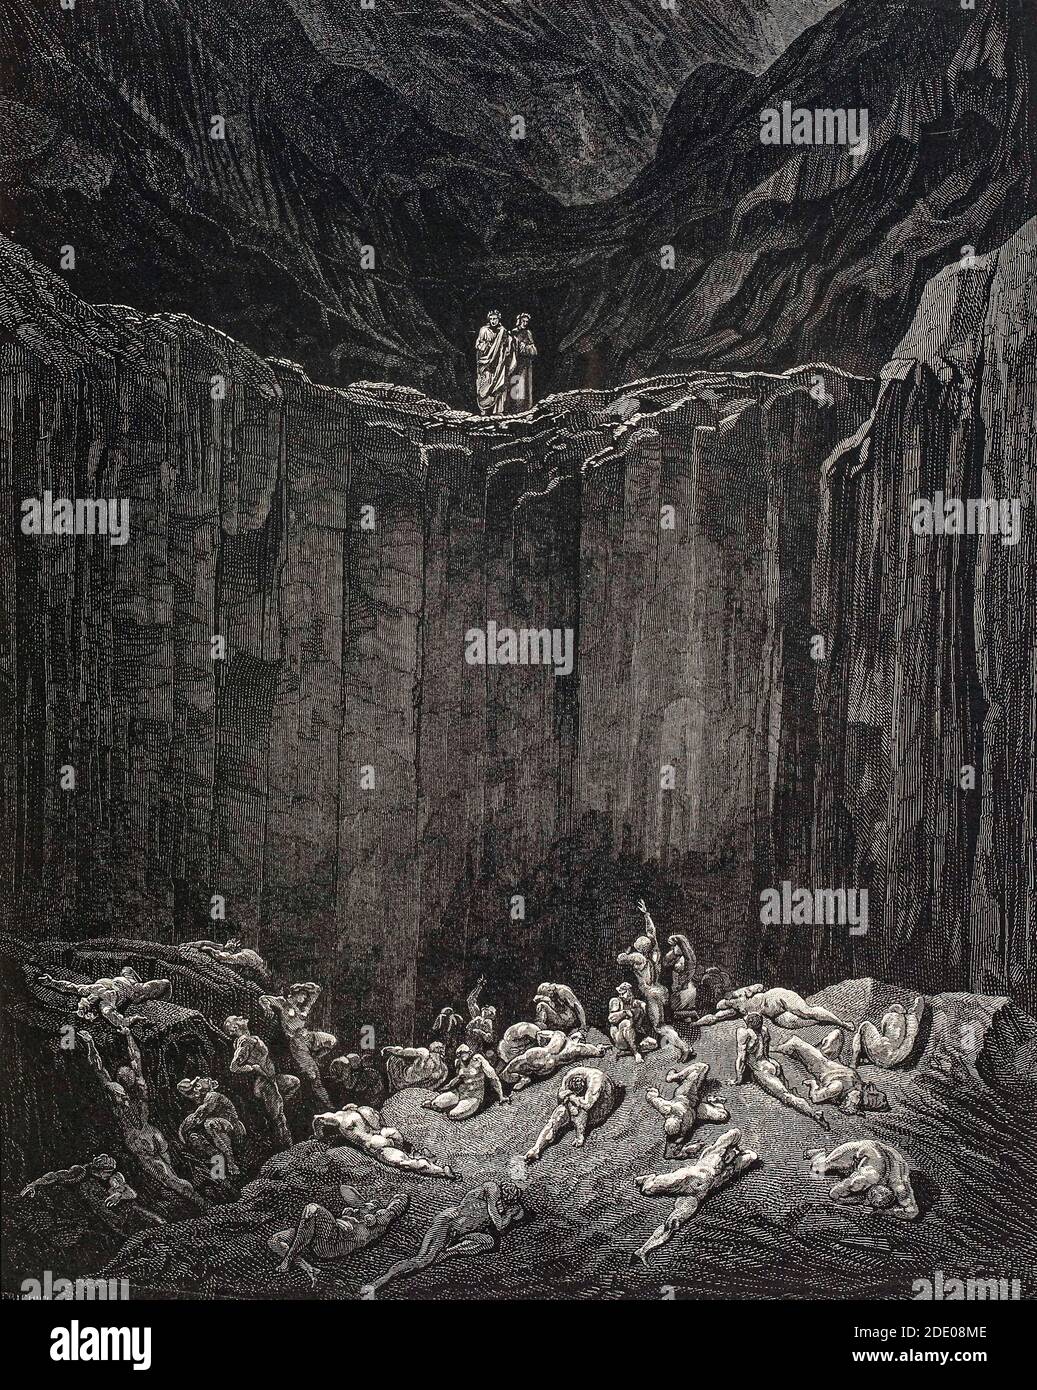 Dante Divina Commedia - Hell - XXIX Canto -  Virgil and Dante in which sowers of discord and counterfeiters are punished respectively - VIII Circle - illustration by Gustave Dorè Stock Photo